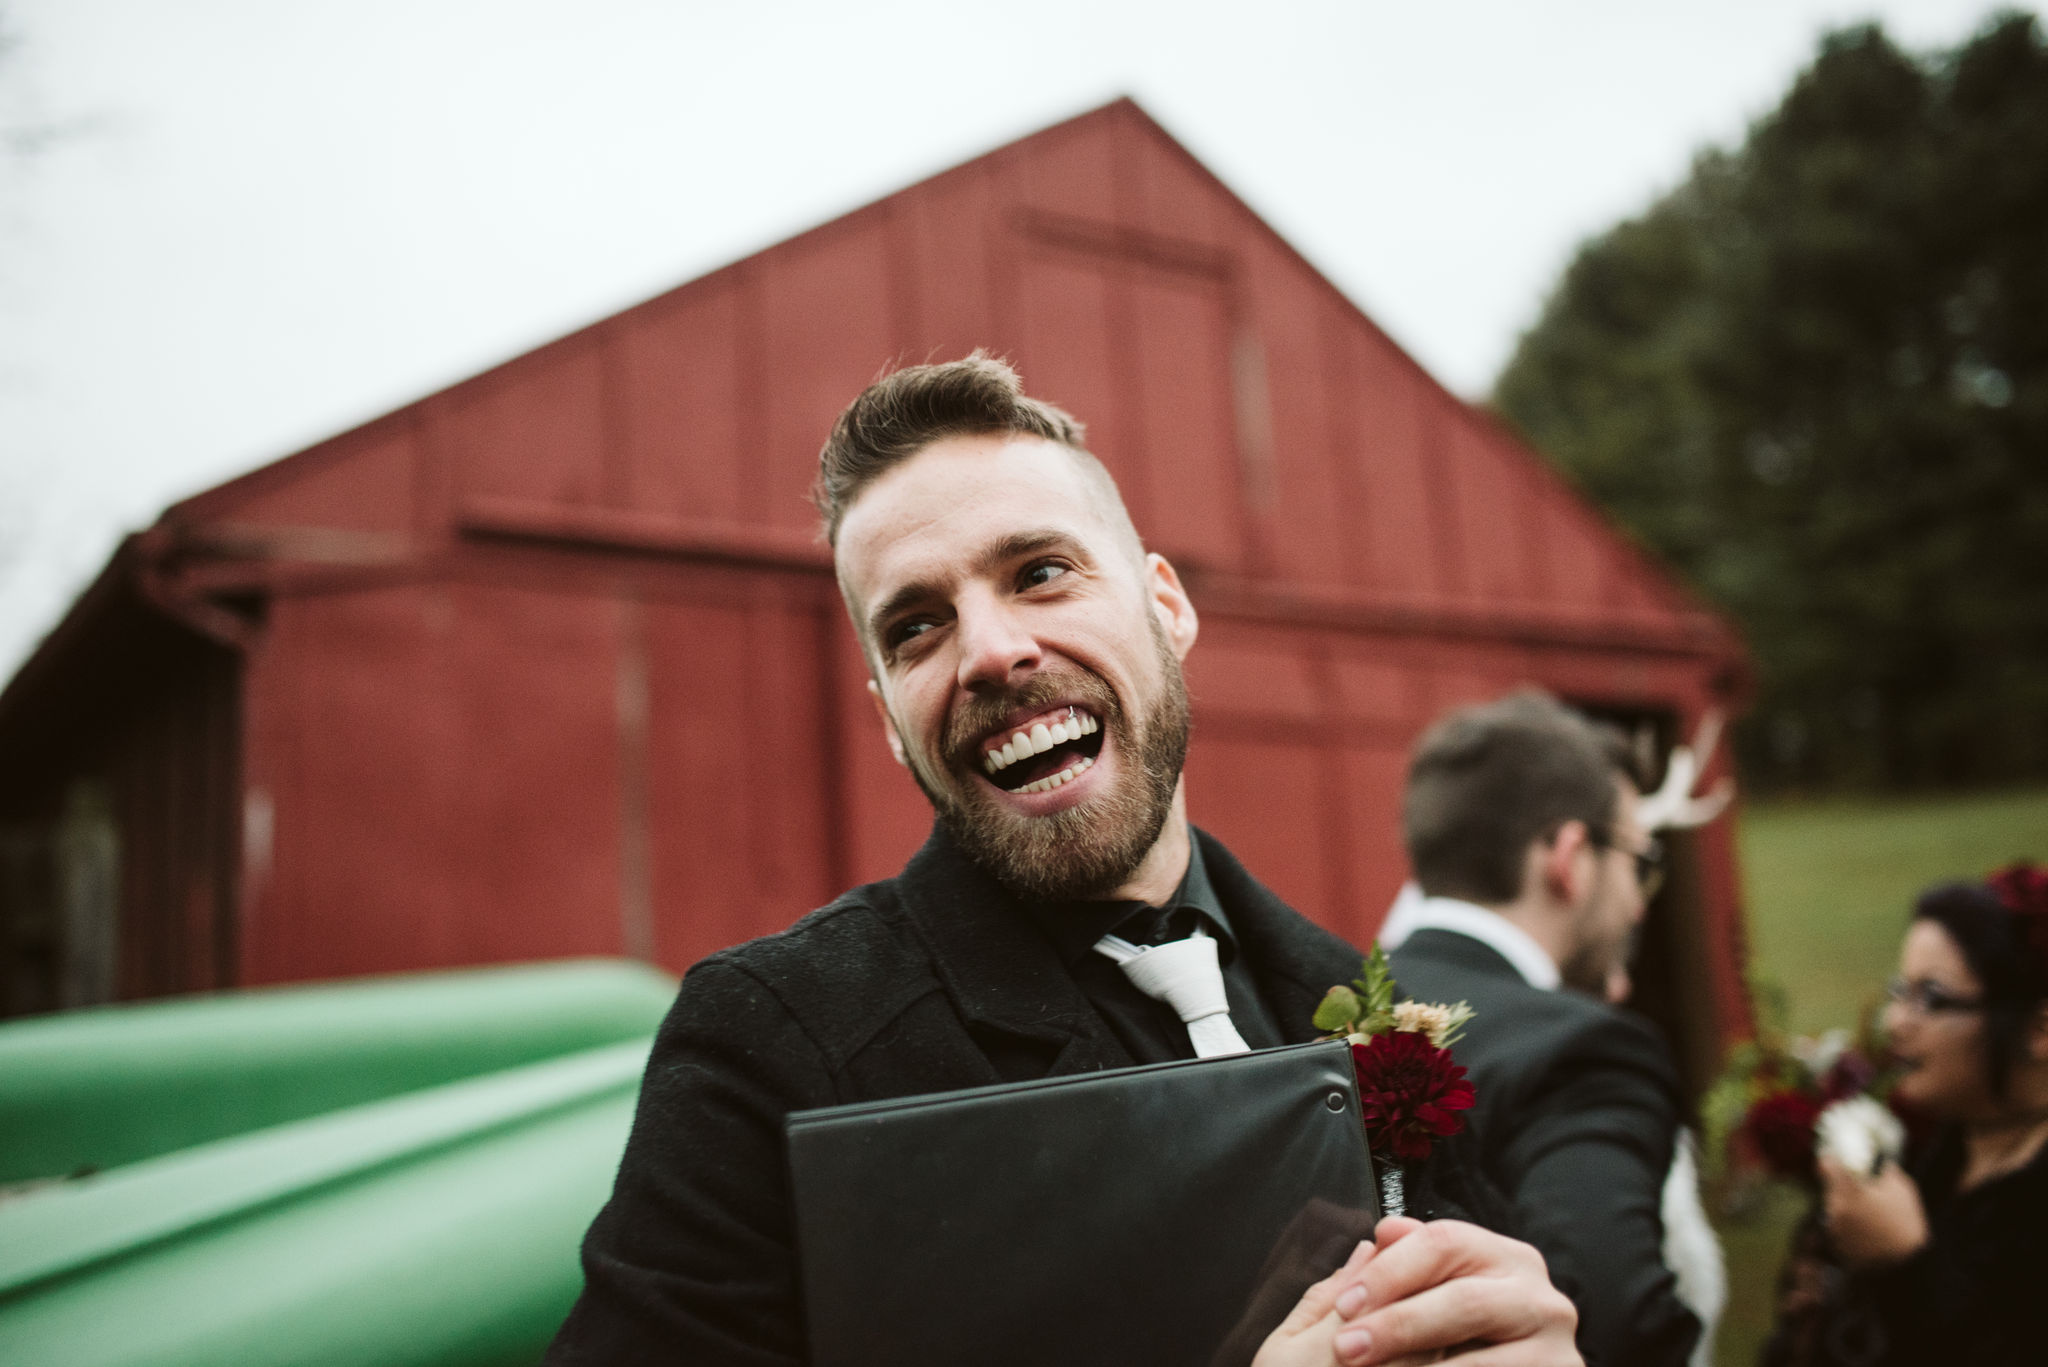  Maryland, Baltimore Wedding Photographer, Backyard Wedding, Fall, October, Dark Bohemian, Whimsical, Fun, Portrait of Guest Smiling and Laughing 